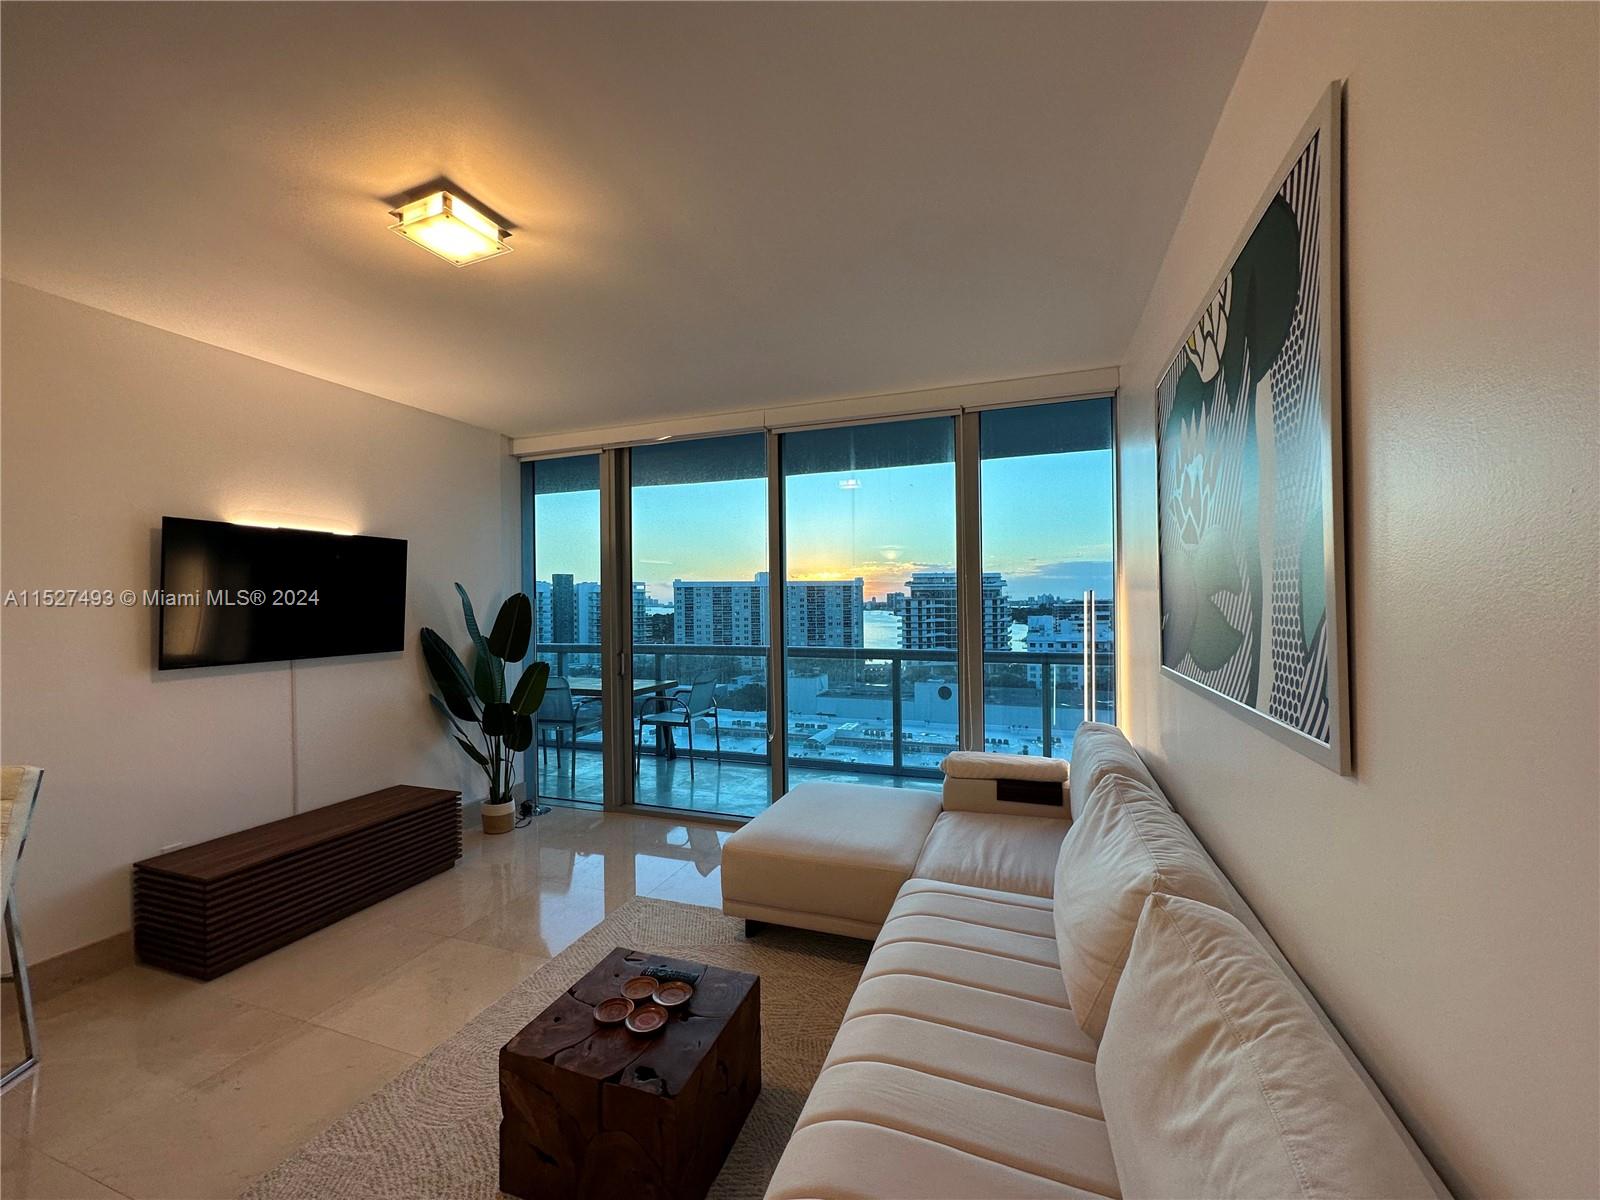 Explore the wonders of oceanfront wellness living at the Carrillon Condo Miami Beach. This modern spacious 1 BD,
1 BA provides endless views of the city of Miami. Sub zero refrigerator, Miele Oven, Samsung Oven and stainless
steel kitchen sink. Washer & Dryer in the unit. Master bath includes double sink with separate jacuzzi tub and
stand up shower. Resort style living with access to 4 different pools, wide range of daily fitness classes, sauna,
spa, and direct beach front. Indulge in the sunset views in your own private expansive balcony. Available starting
March 1, 2024. Available less than 1 year, minimum 6 months+1 day.